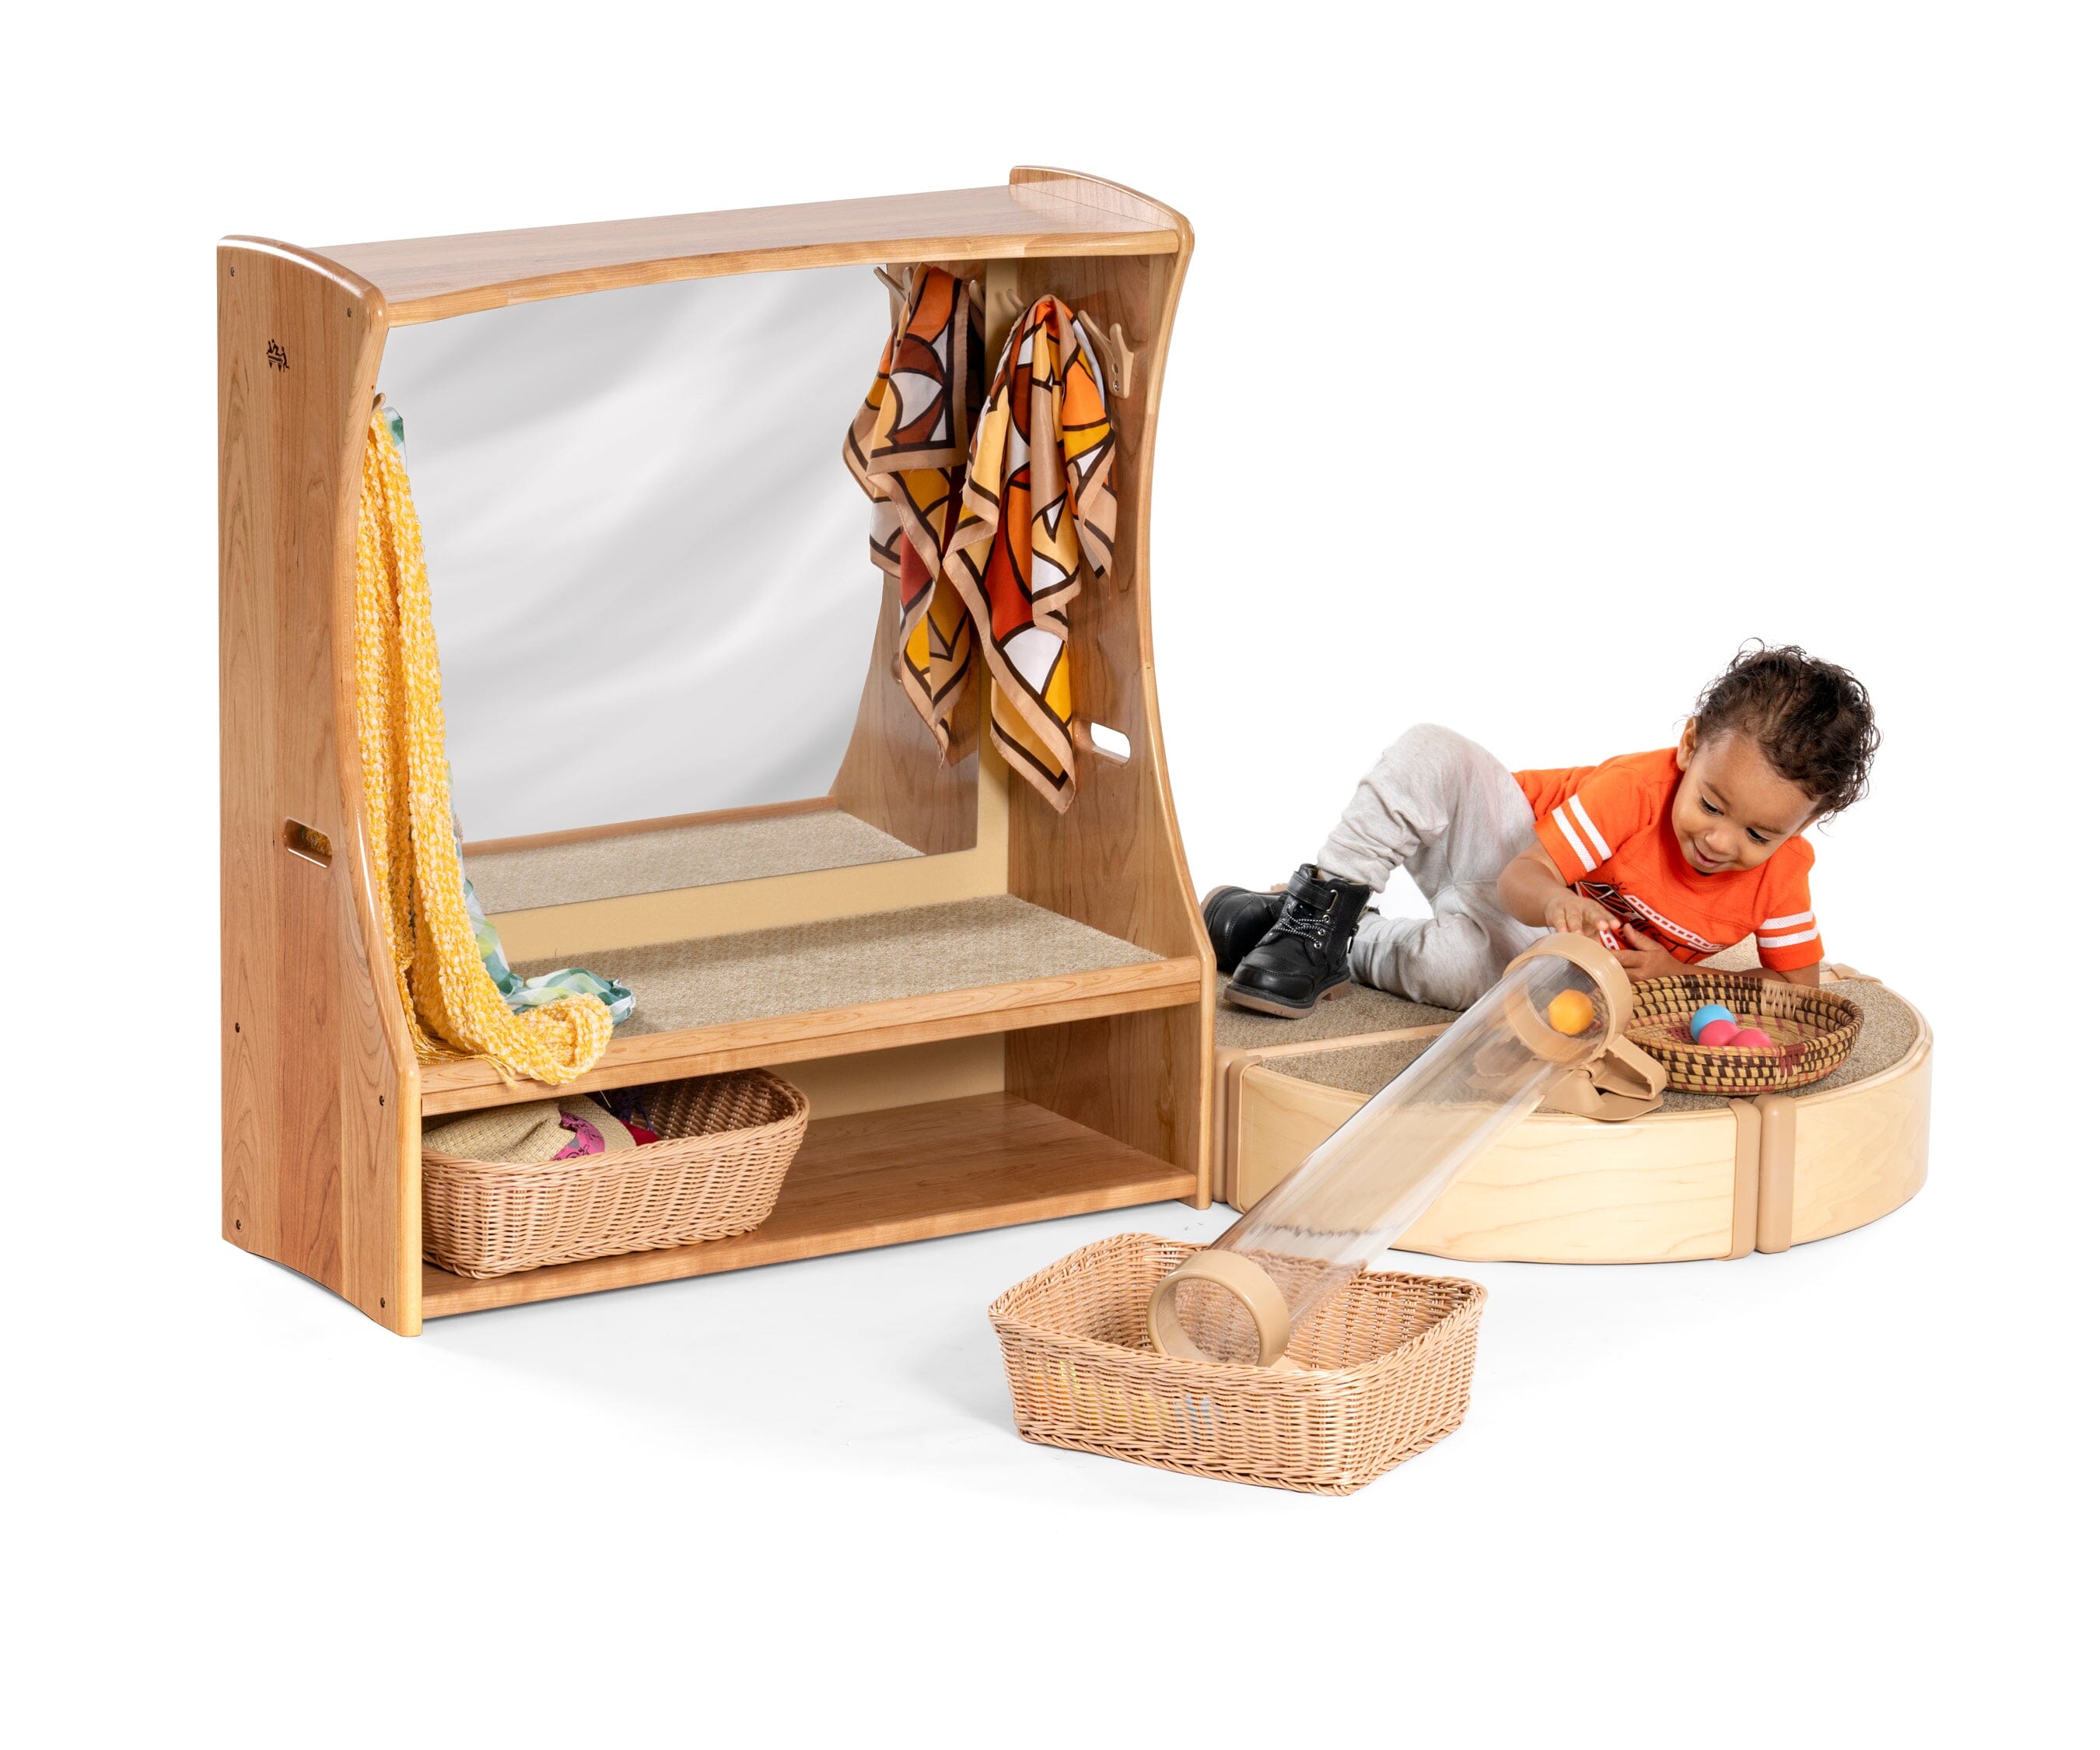 Toddler Theater From Community Playthings by Community Playthings - louisekool